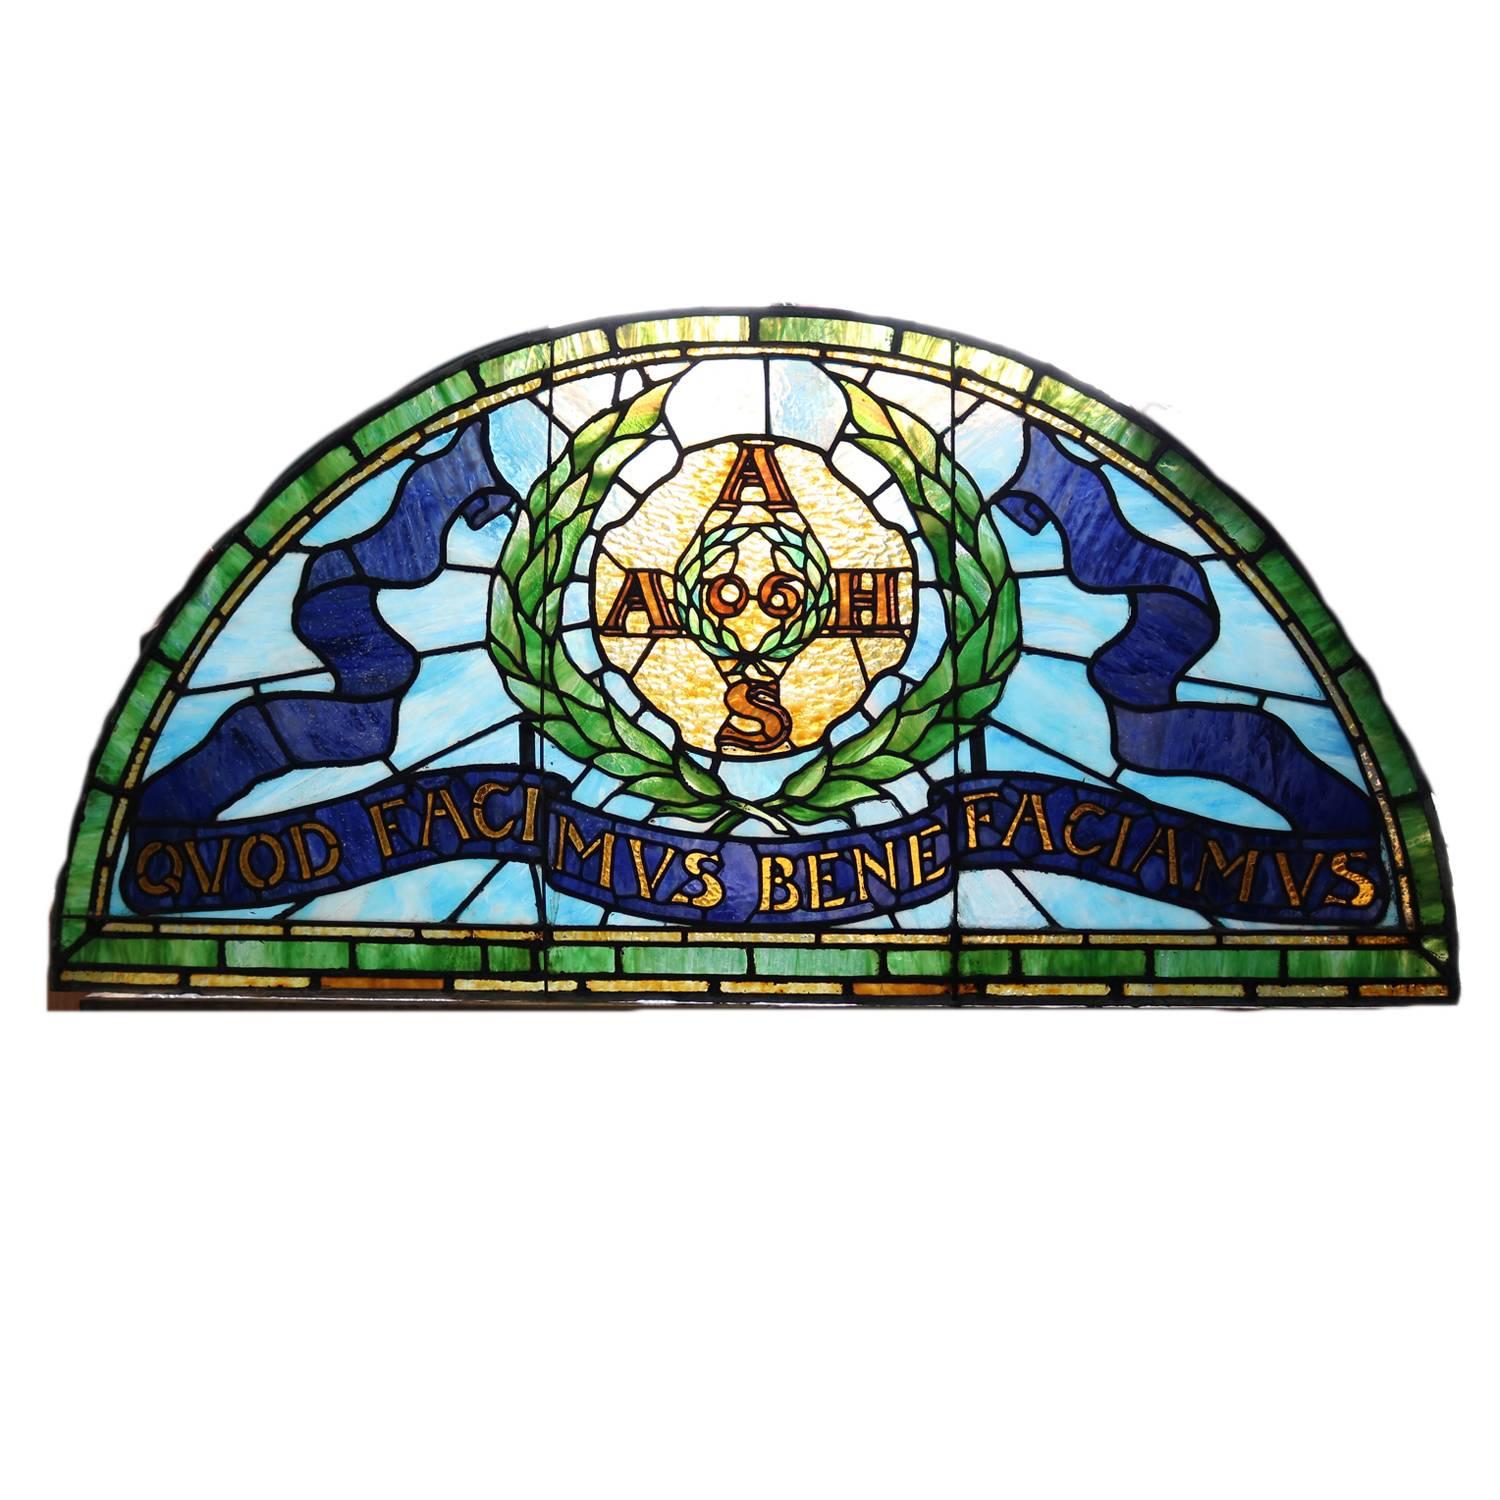 Transom Leaded Glass Window, New York, "AAHS What You Do, Do Well", circa 1806